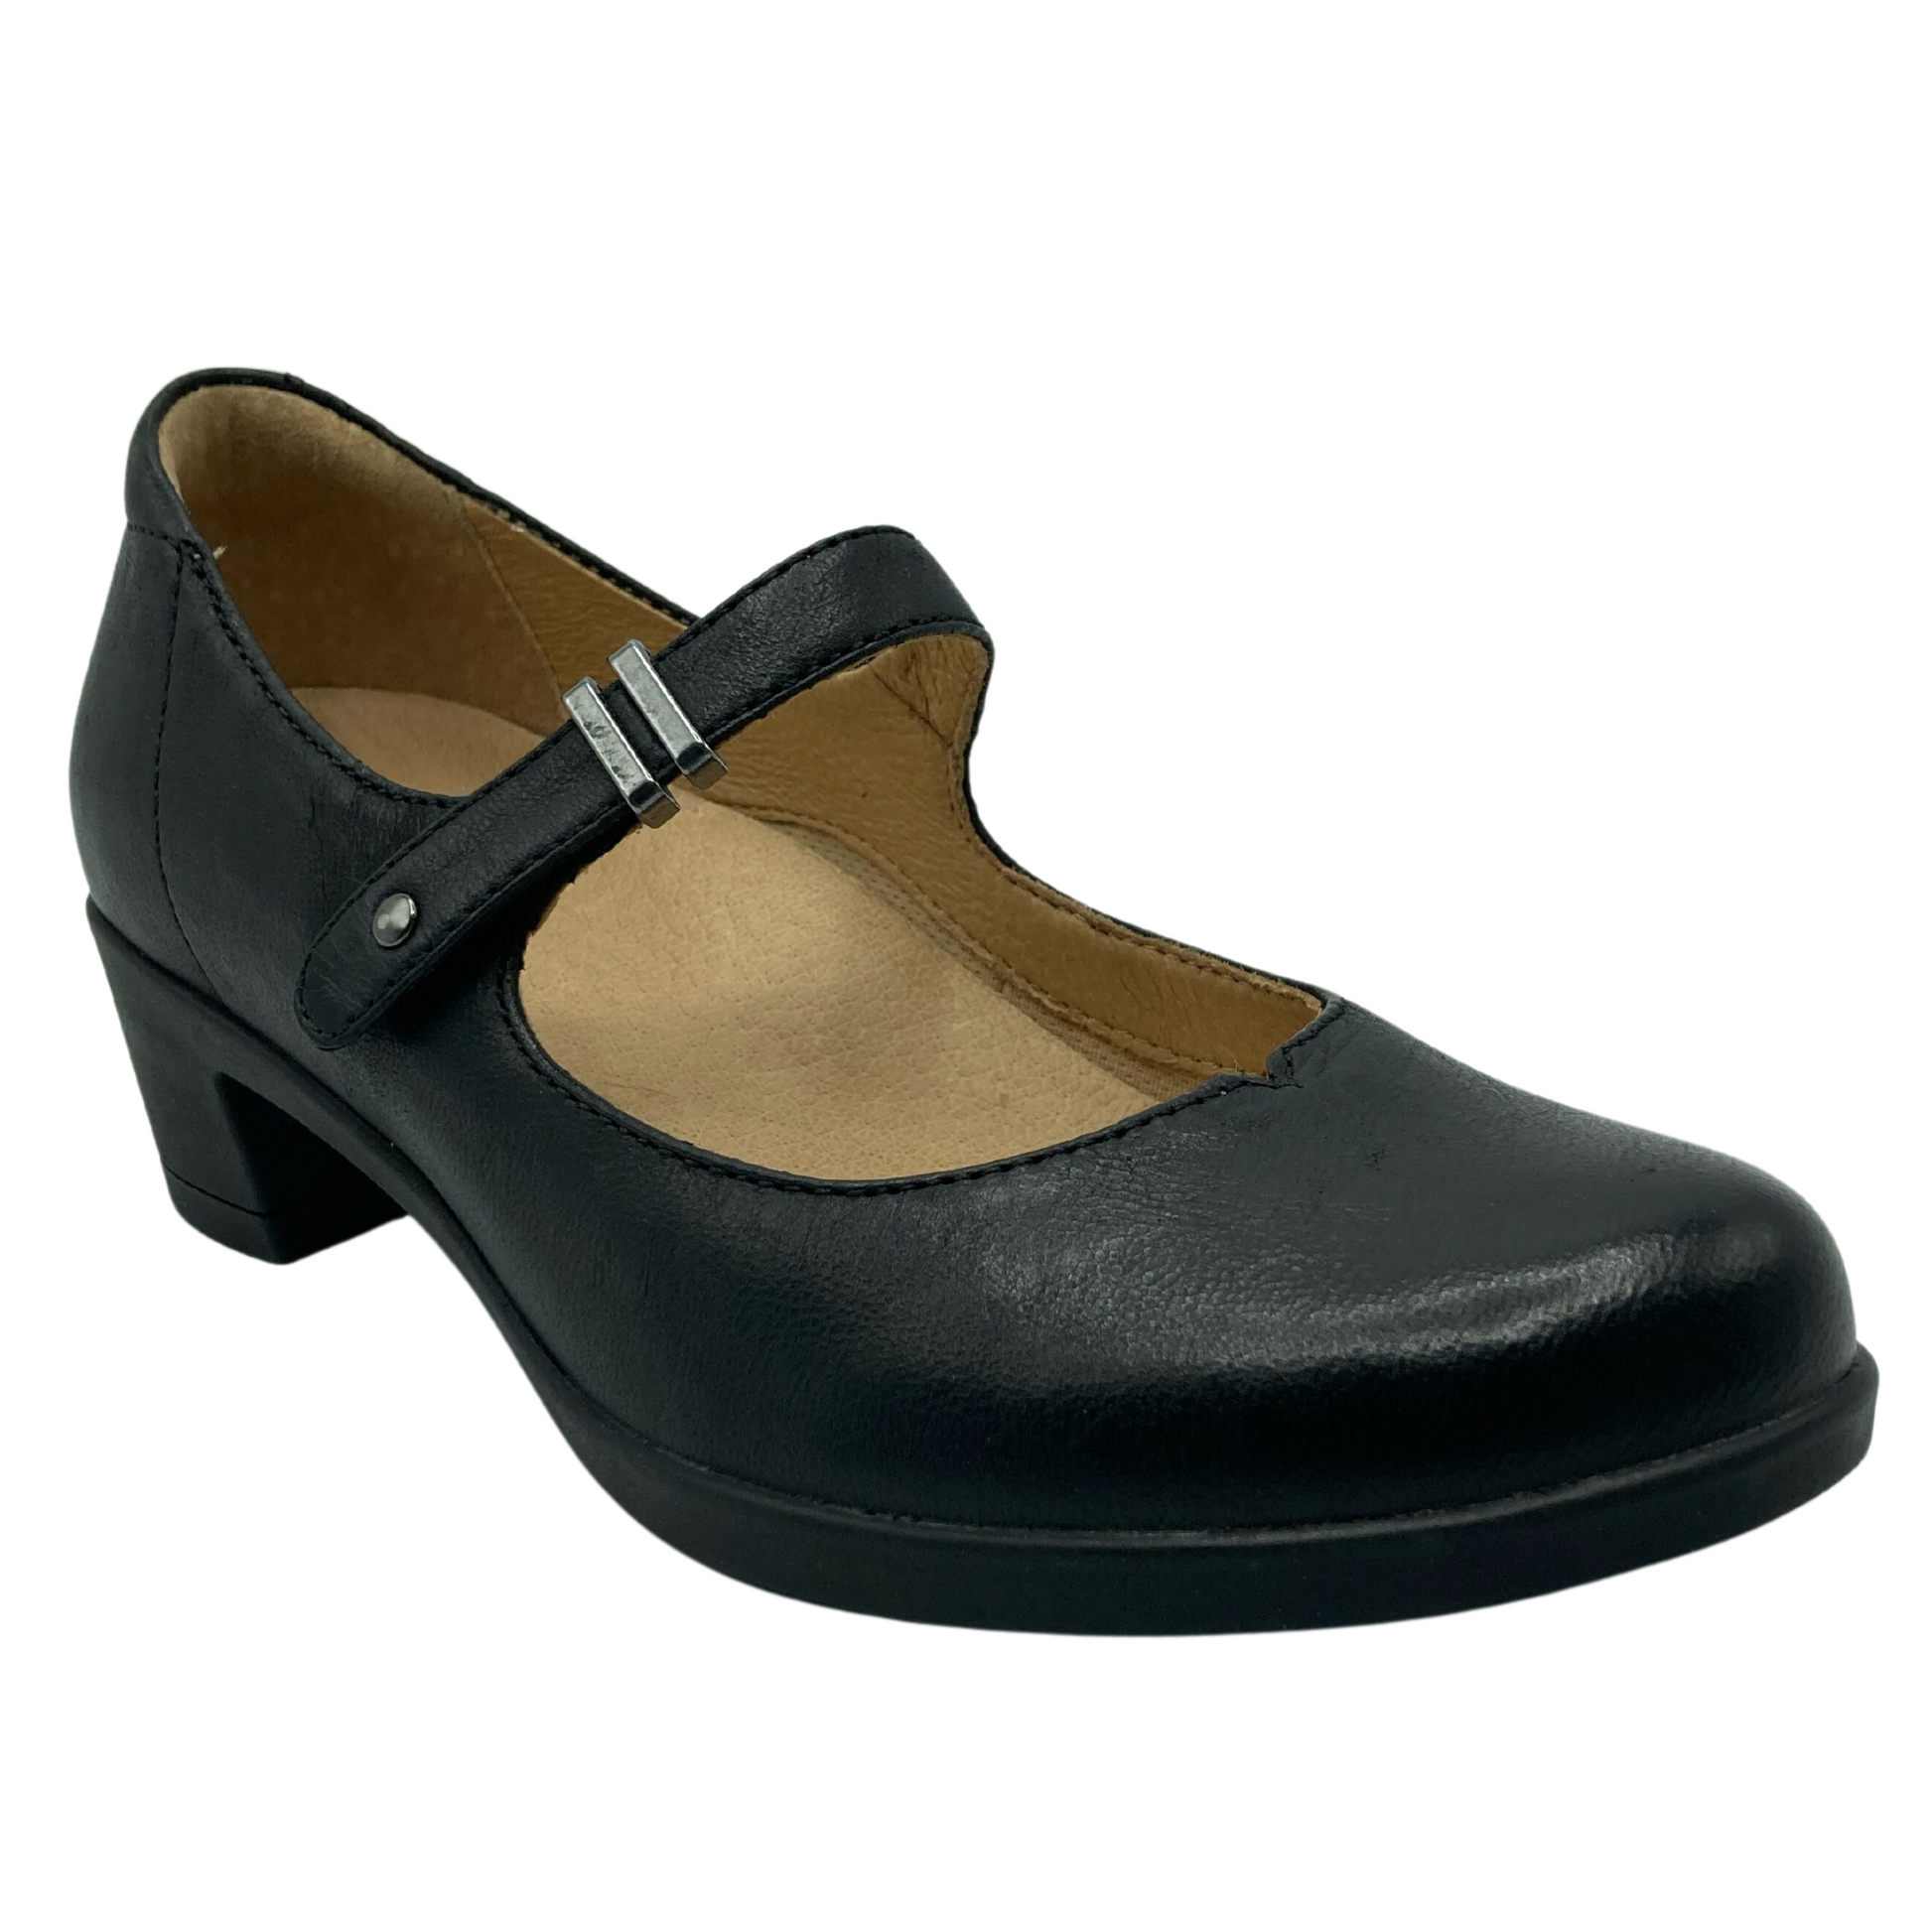 45 degree angled view of black leather mary janes with low block heel and silver details on strap